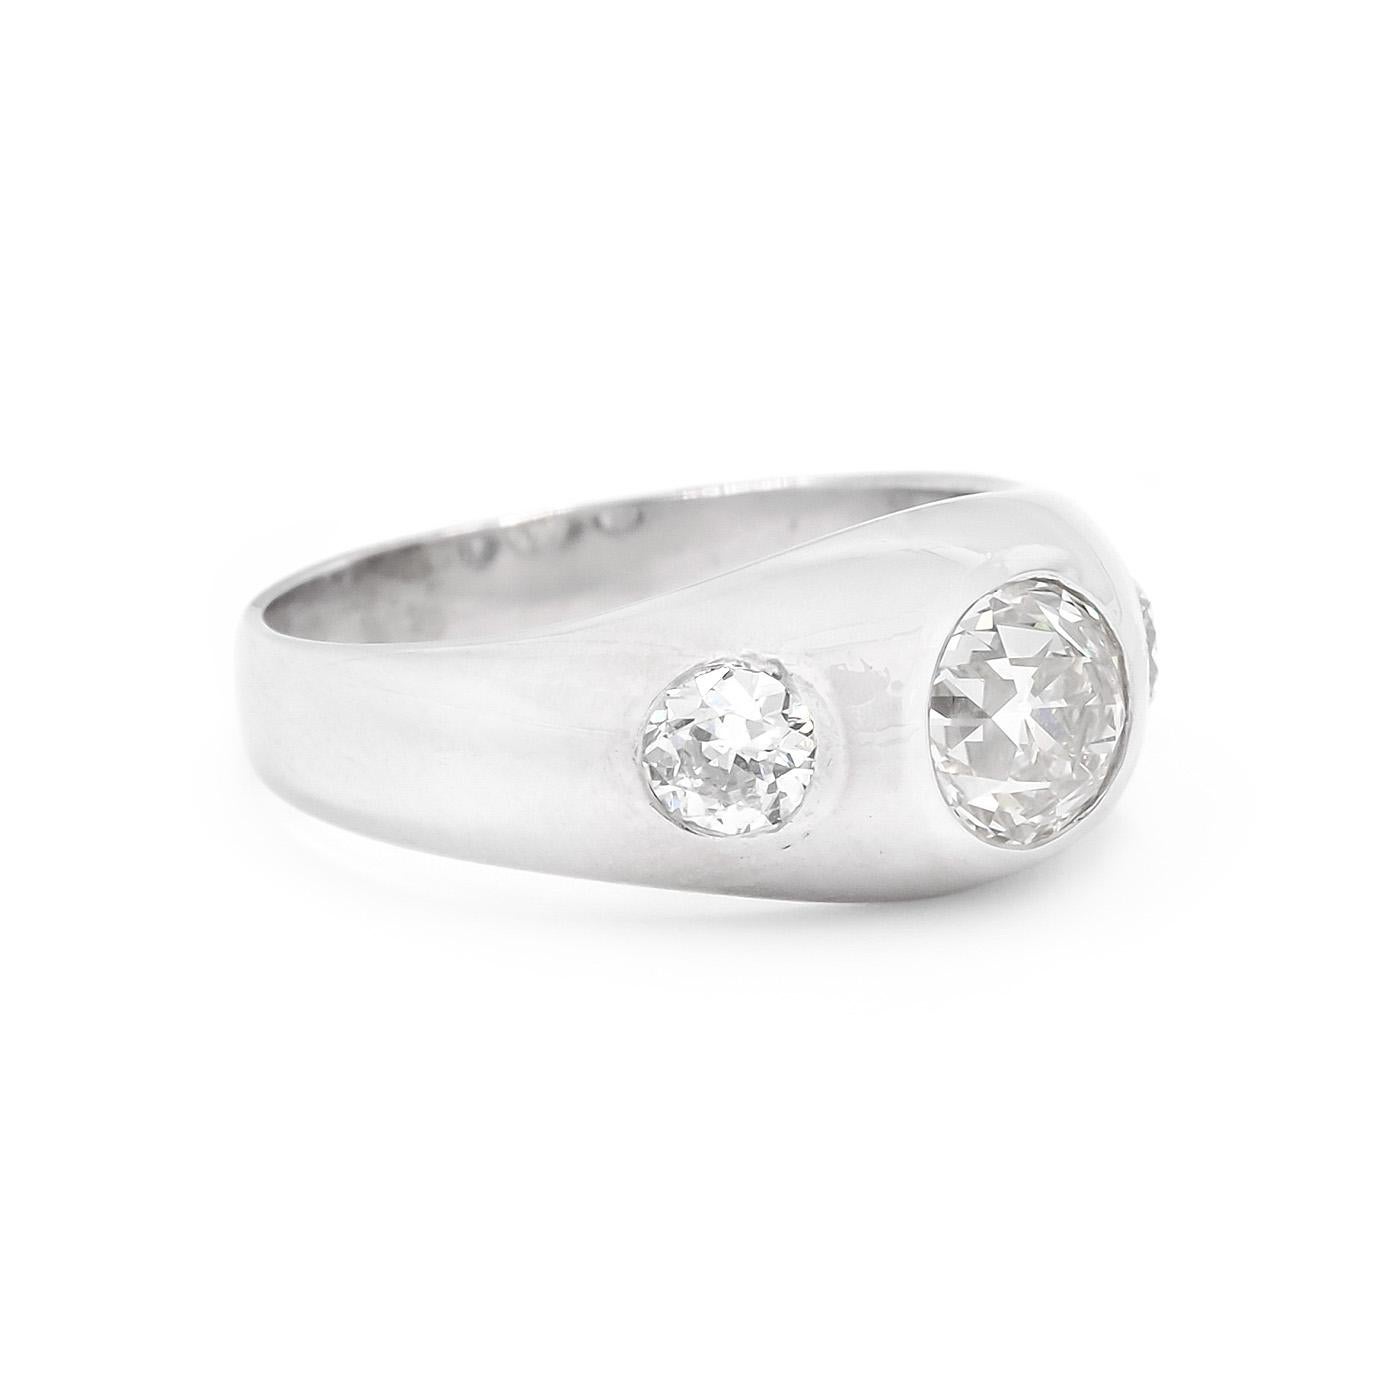 Art Deco era 1.40 Ctw. Old European Cut Diamond 3-Stone Ring composed of platinum. The center 1.00 carat Old European Cut diamond is GIA certified J color & VS2 and is flanked by 2 Old European Cut diamonds that weigh approximately 0.40 carats in